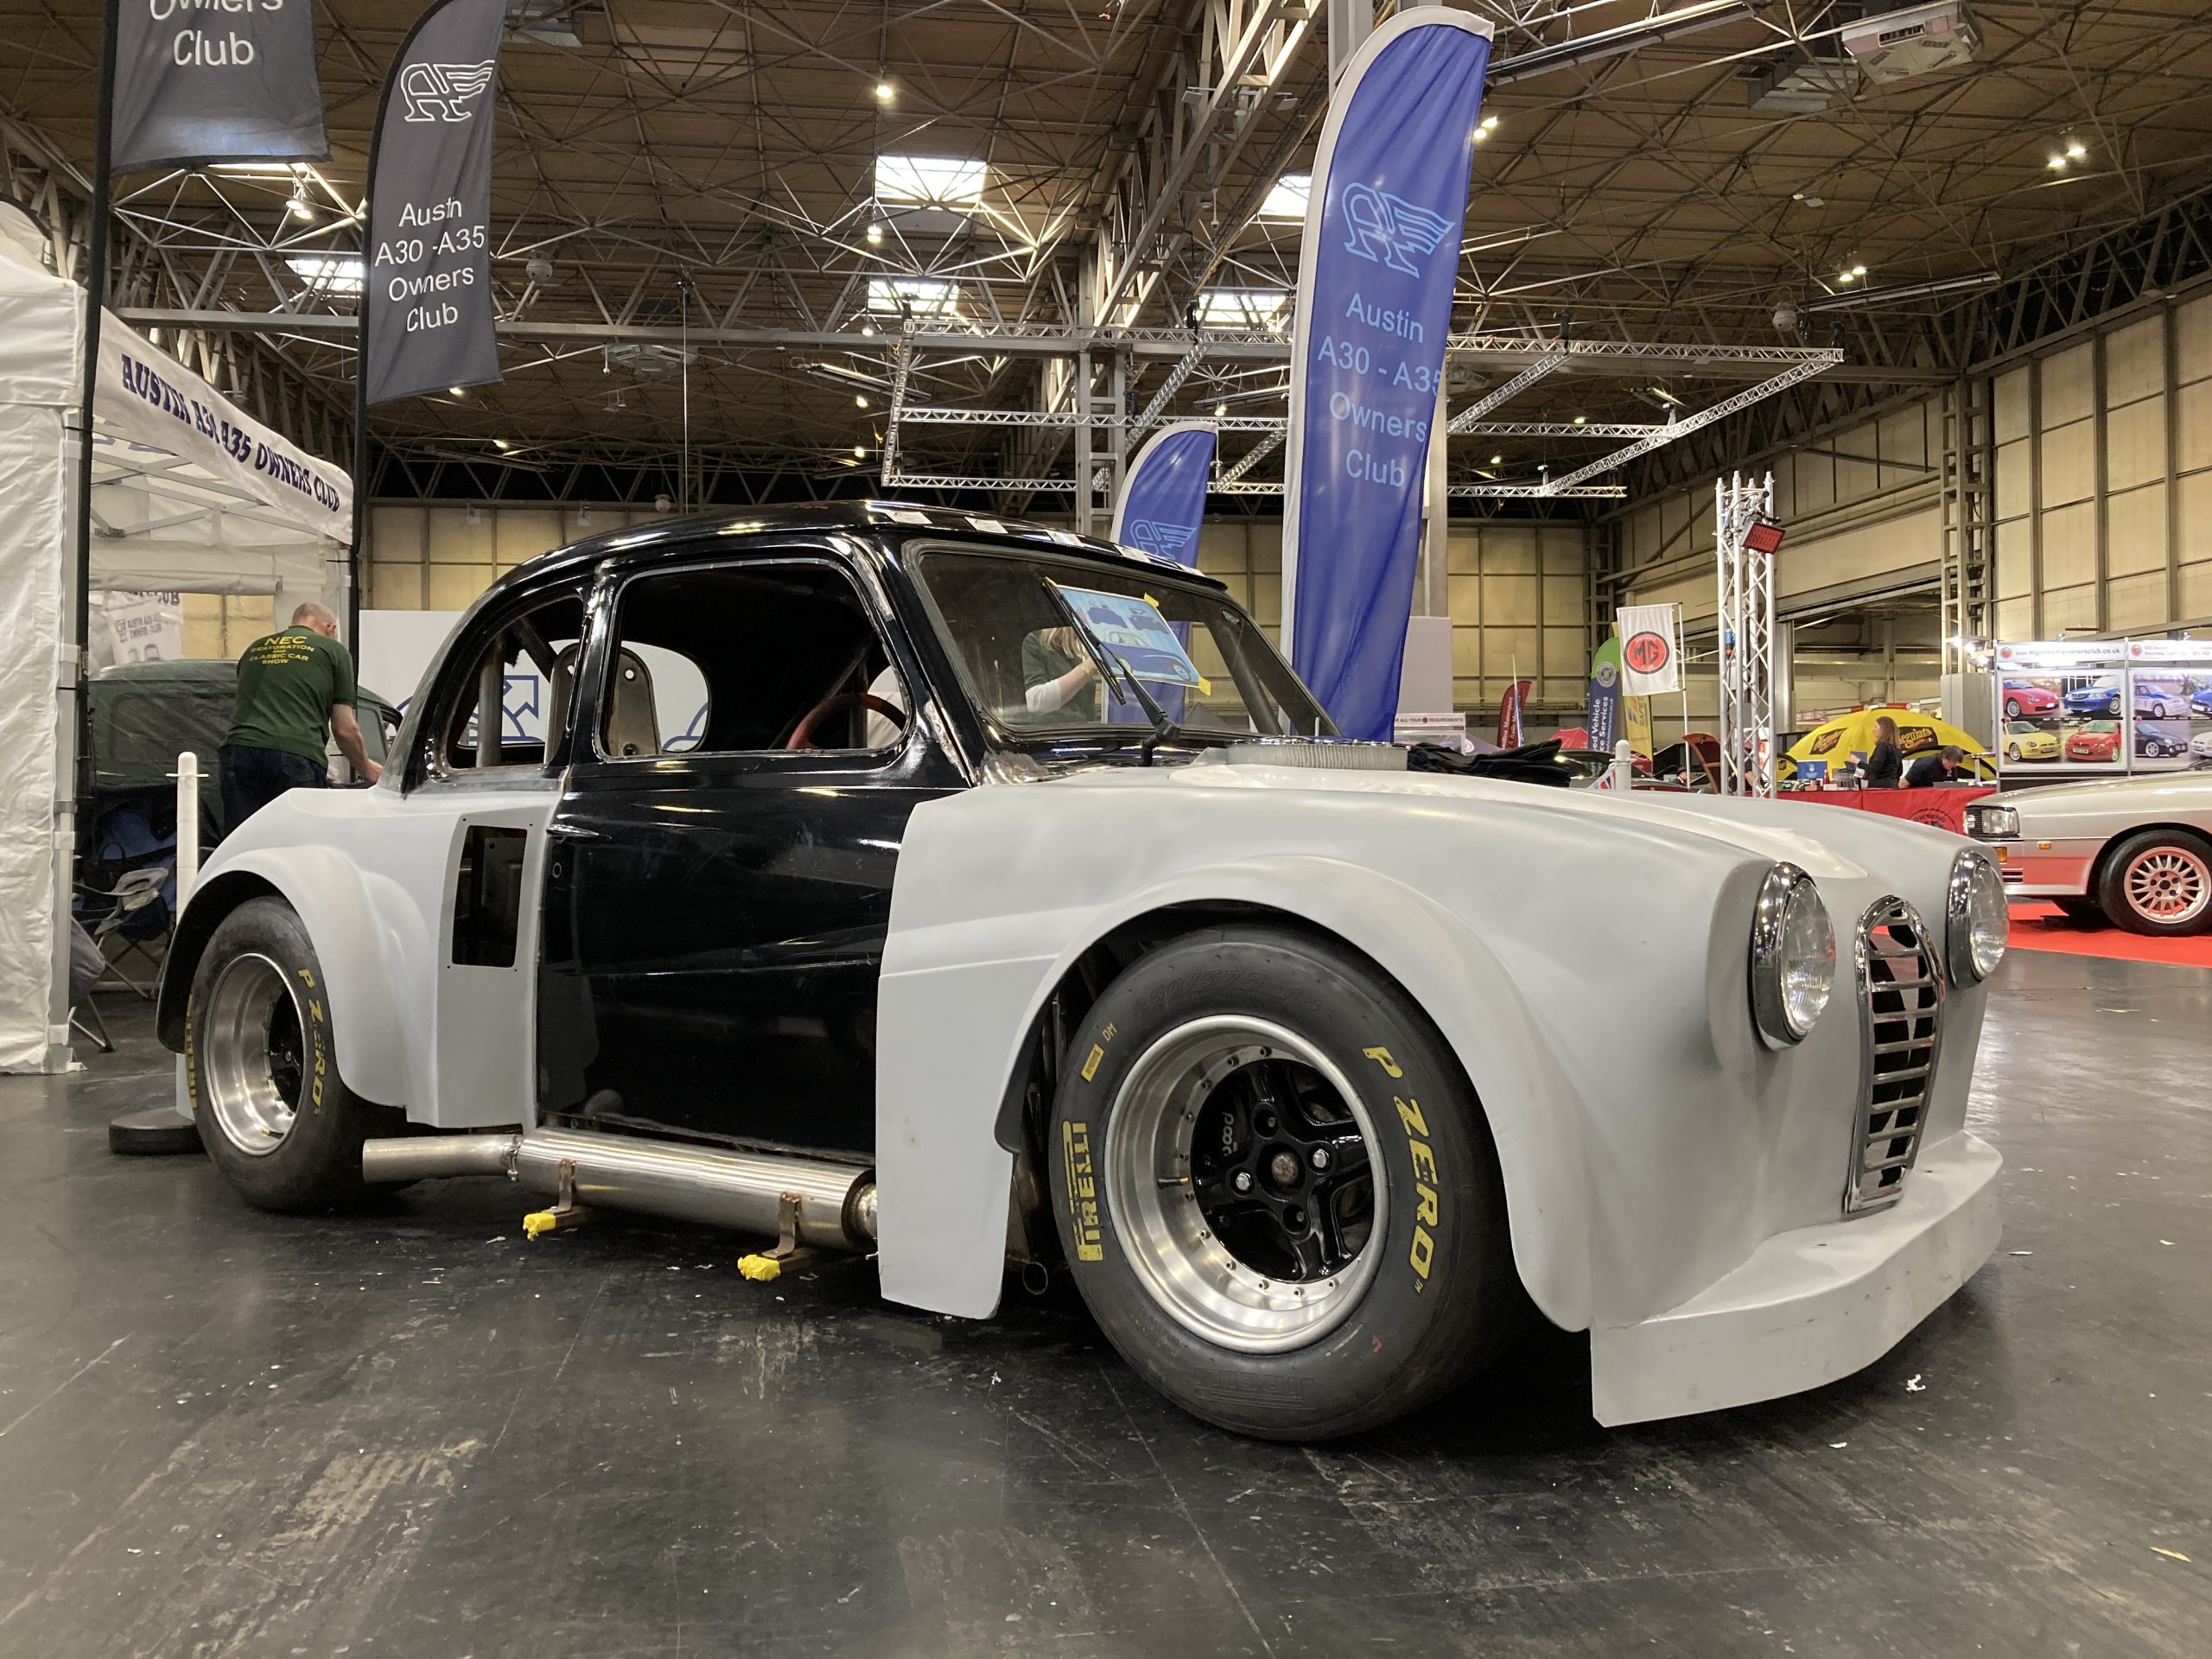 This Mustang-powered Austin A35 is nearly ready to race